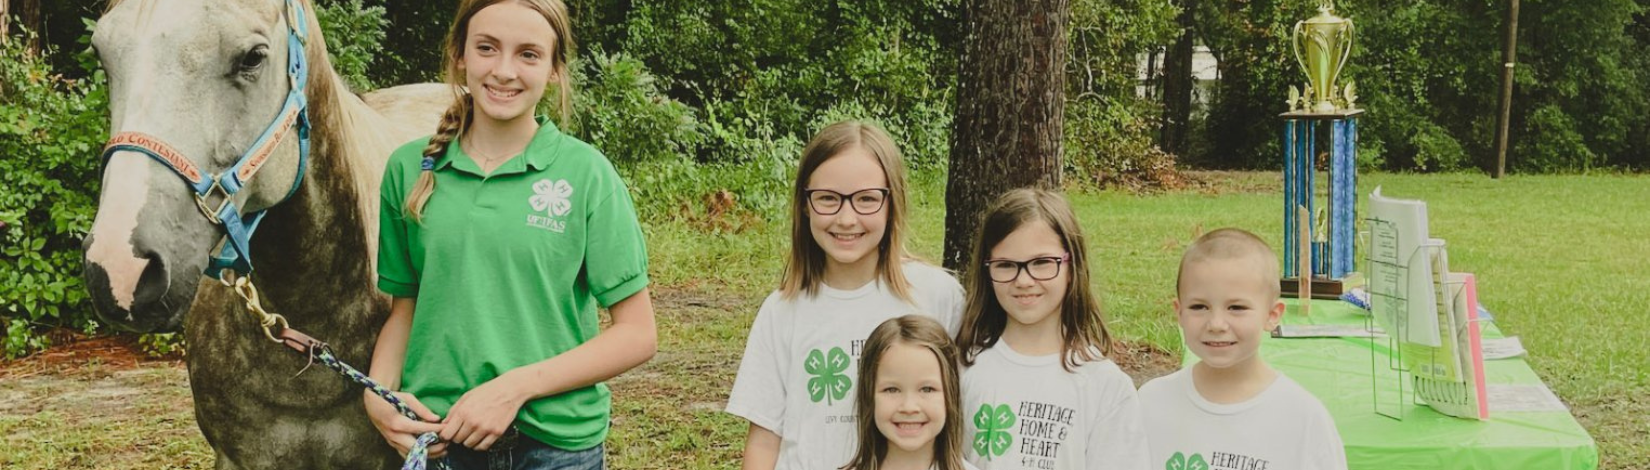 4-H Members standing together